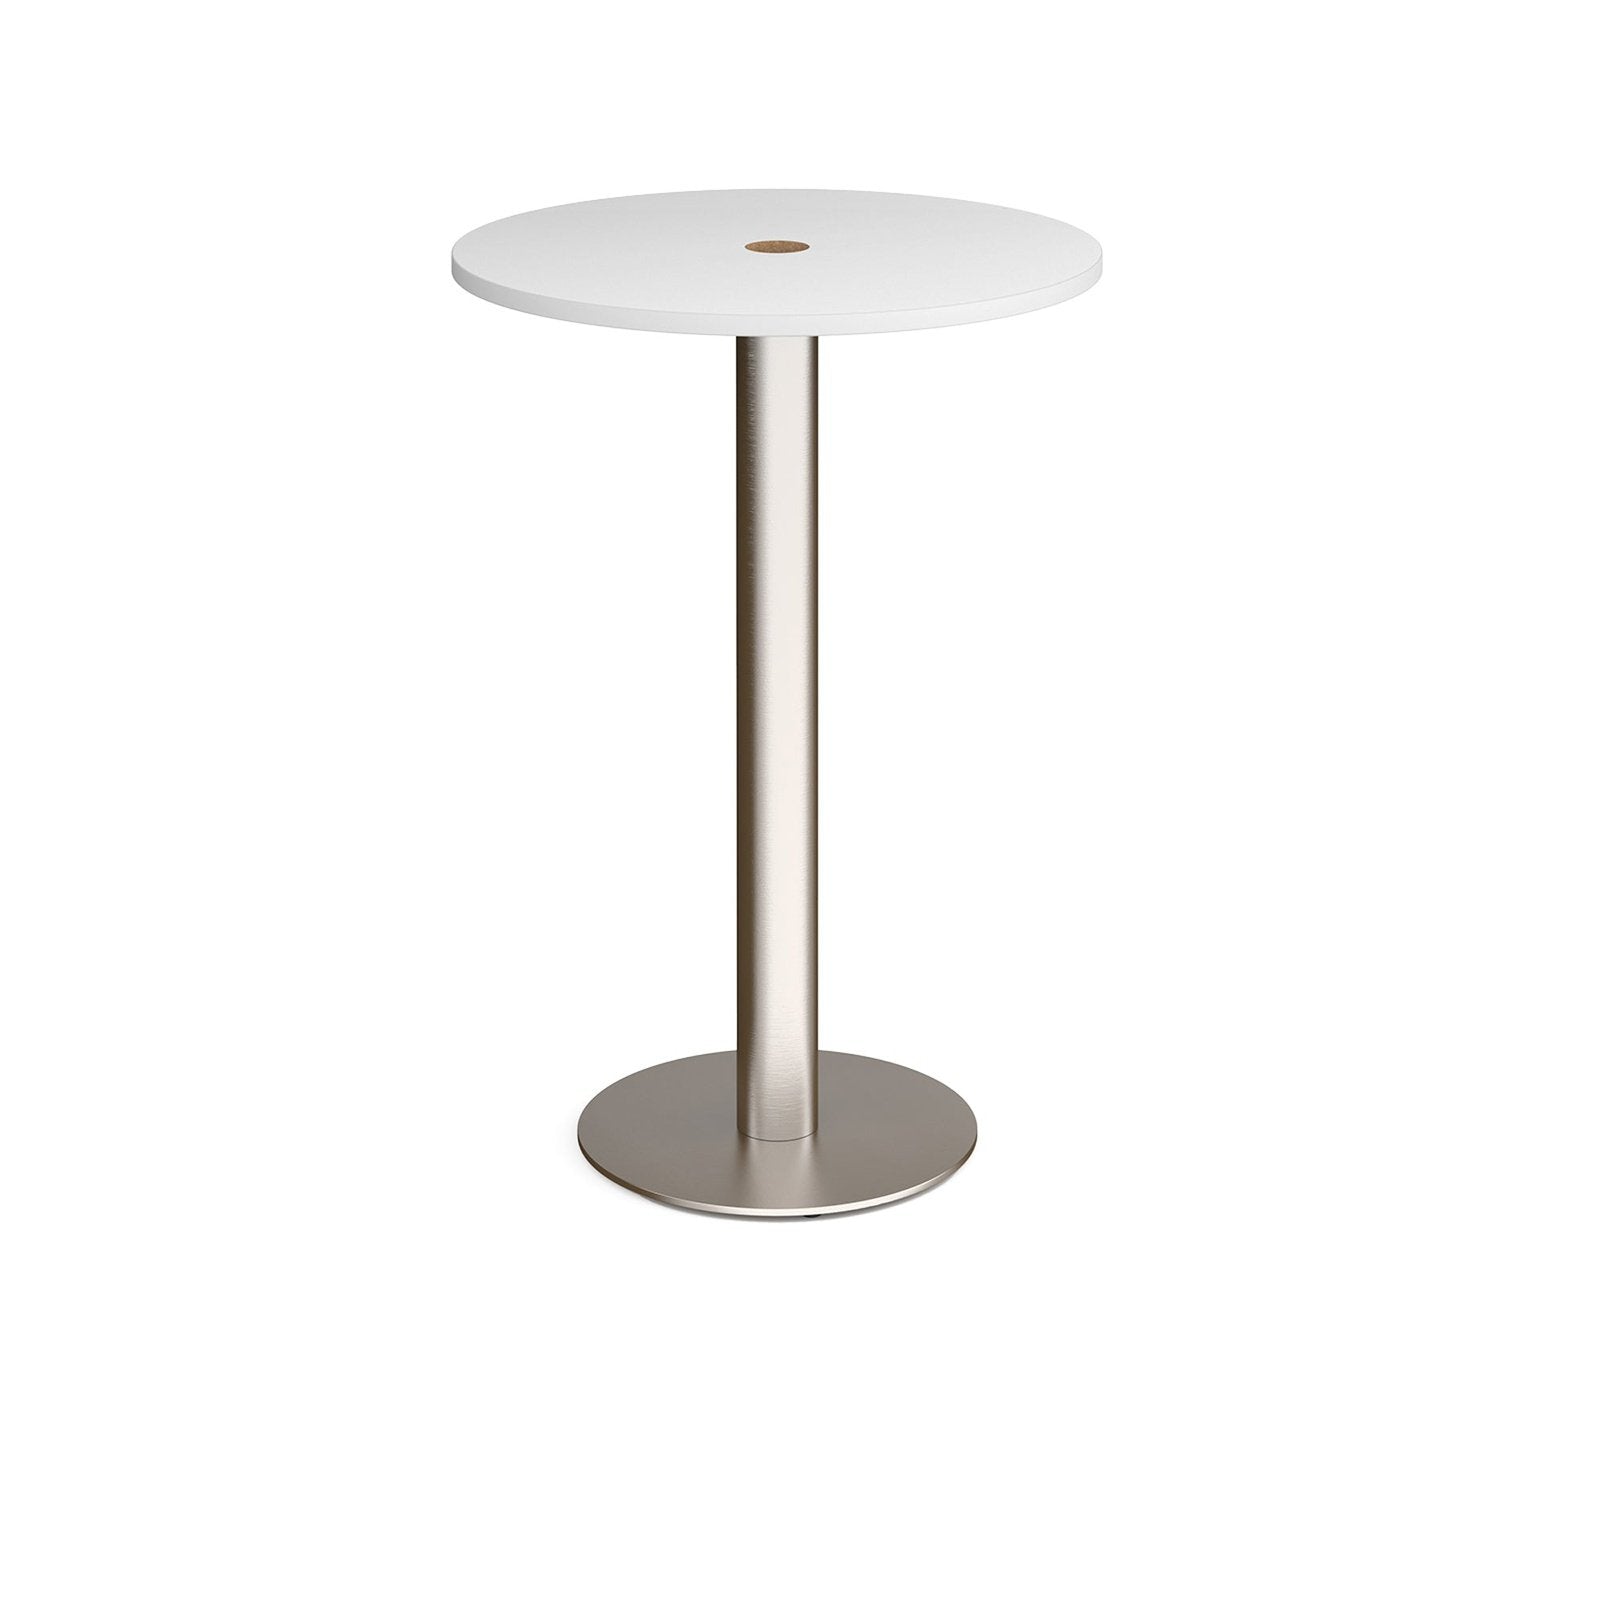 Monza poseur table 800mm with central circular cutout 80mm - Office Products Online